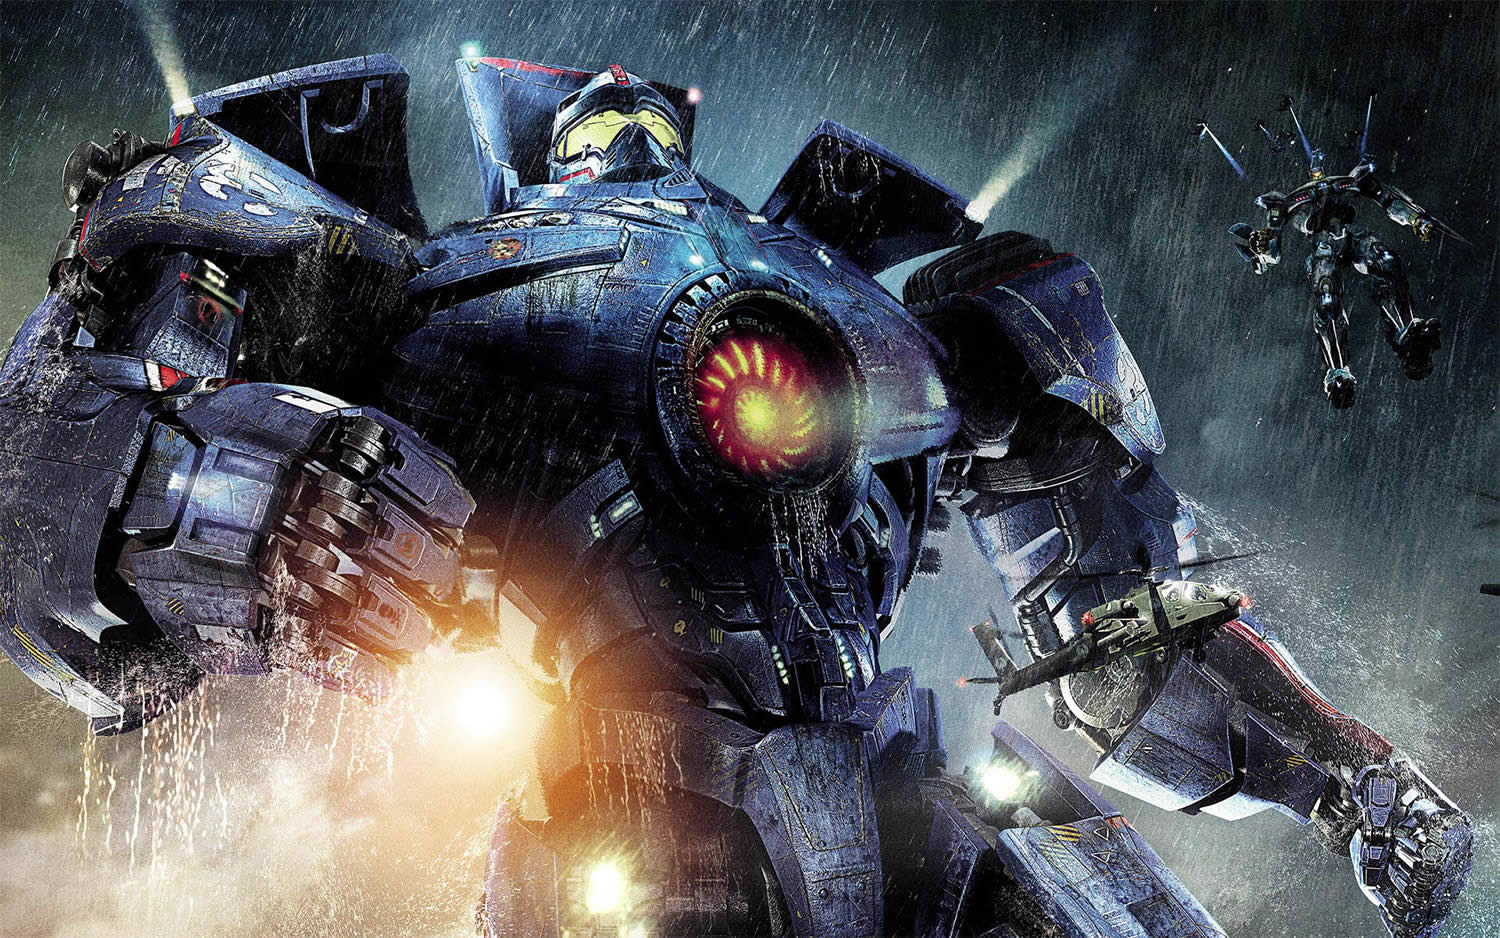 gypsy danger from pacific rim movie